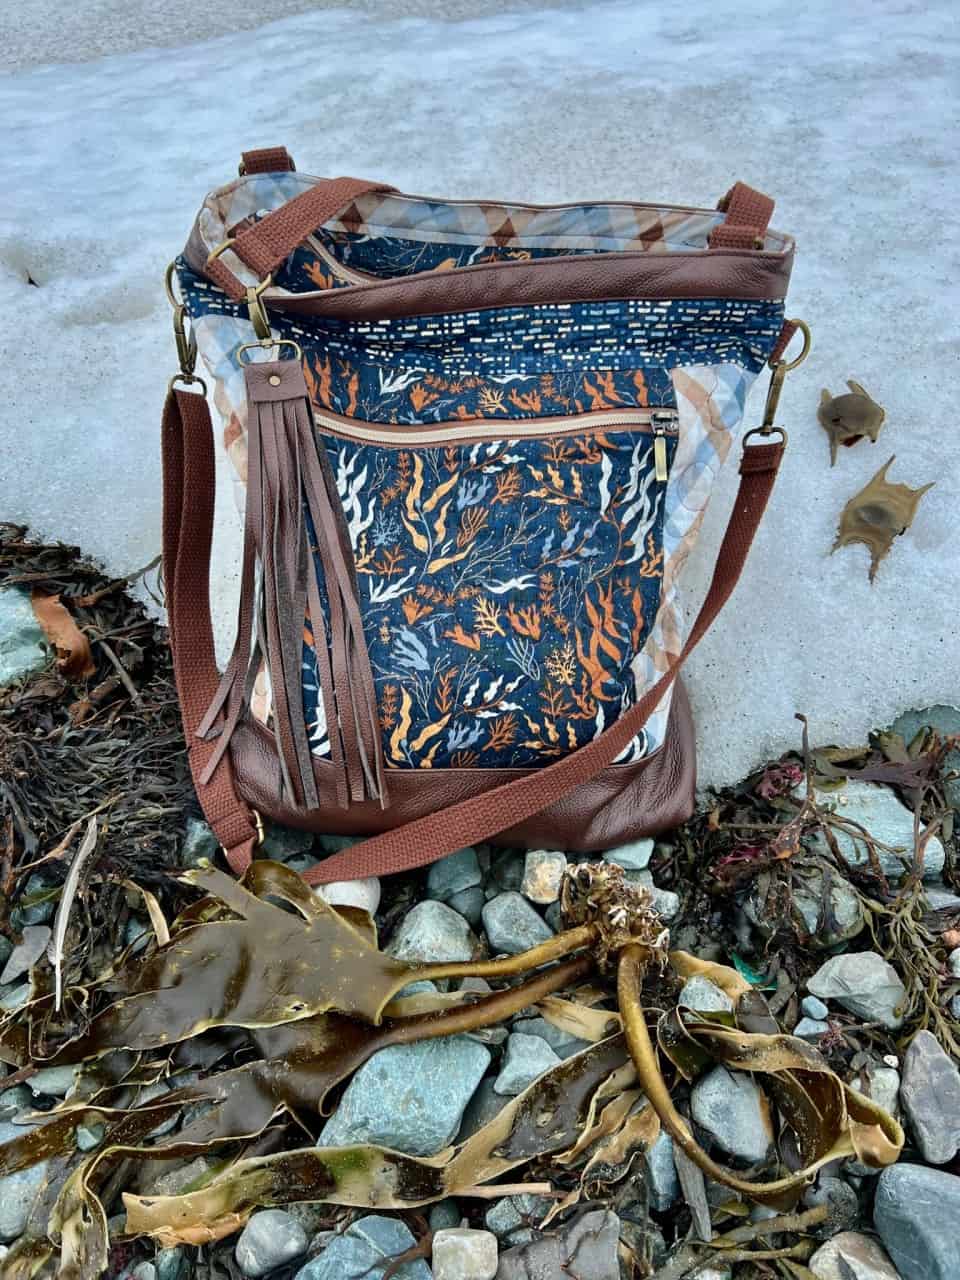 Handmade Artisan Seaweed Tote Bag  - Designer fashion tote, “Vieve”, the seaweed and kelp bag on site in the wild.  Handmade purse by solo artisan, Genevieve Myles, the tote was custom designed using the finest leather and fabrics. The coastal print features seaweed and kelp with a humpback whale fabric interior. 